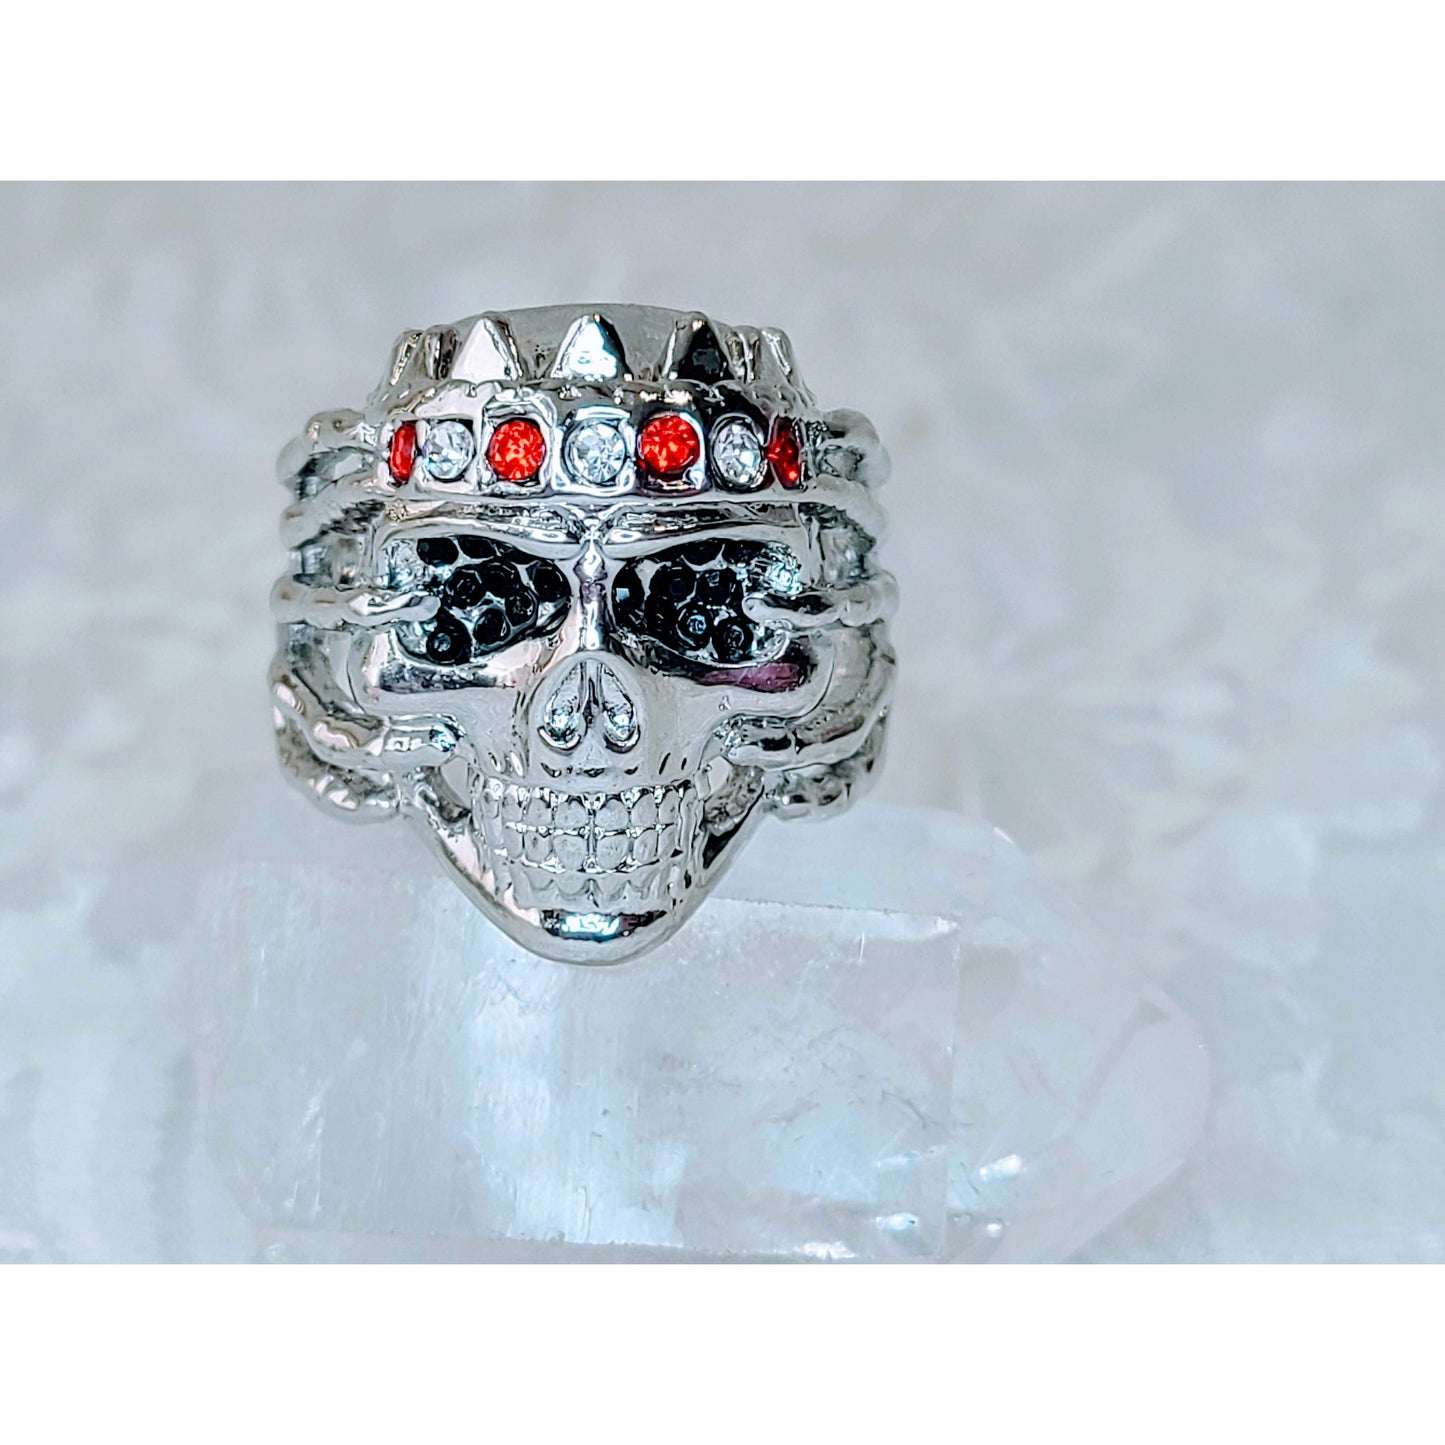 Silver Skull Ring Stainless Steel w/ Rhinestones ~ Boyfriend Gift ~ Gift for Best Friends ~ Comes in Gift Box ALMOST GONE!